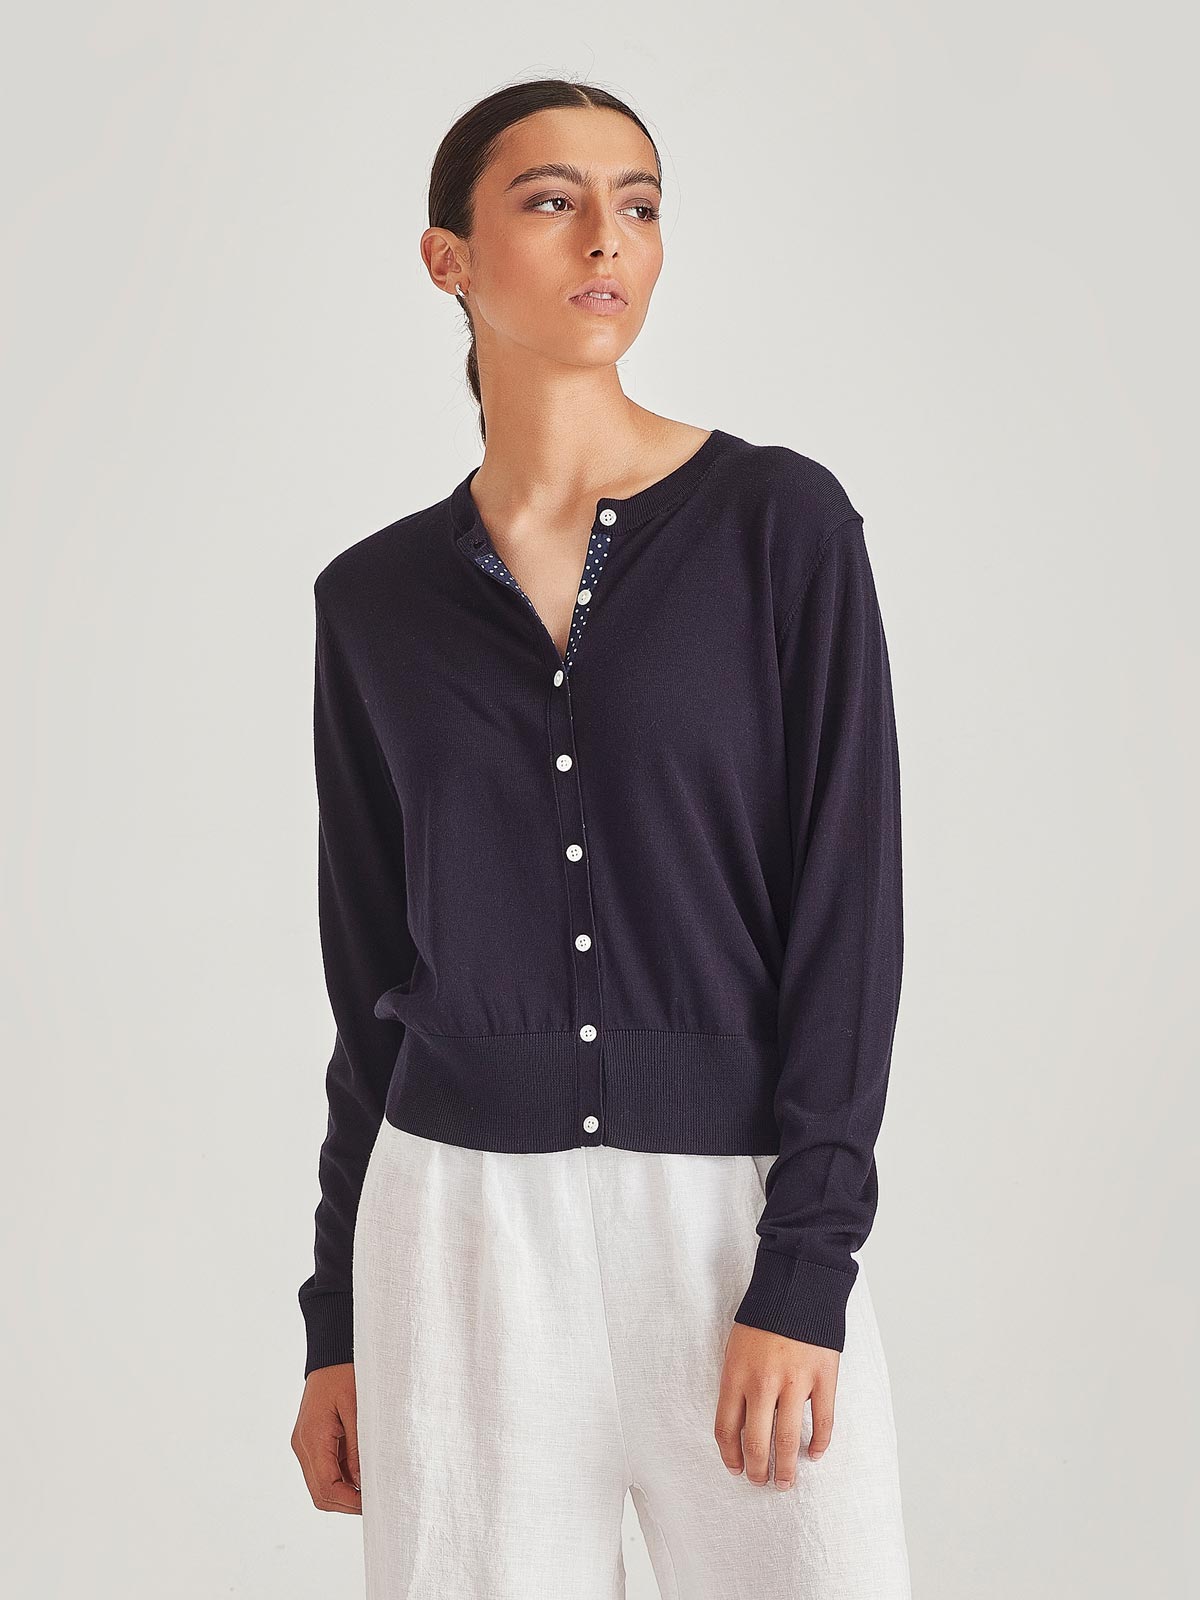 SILLS BOQUETTE CARDI - FRENCH NAVY